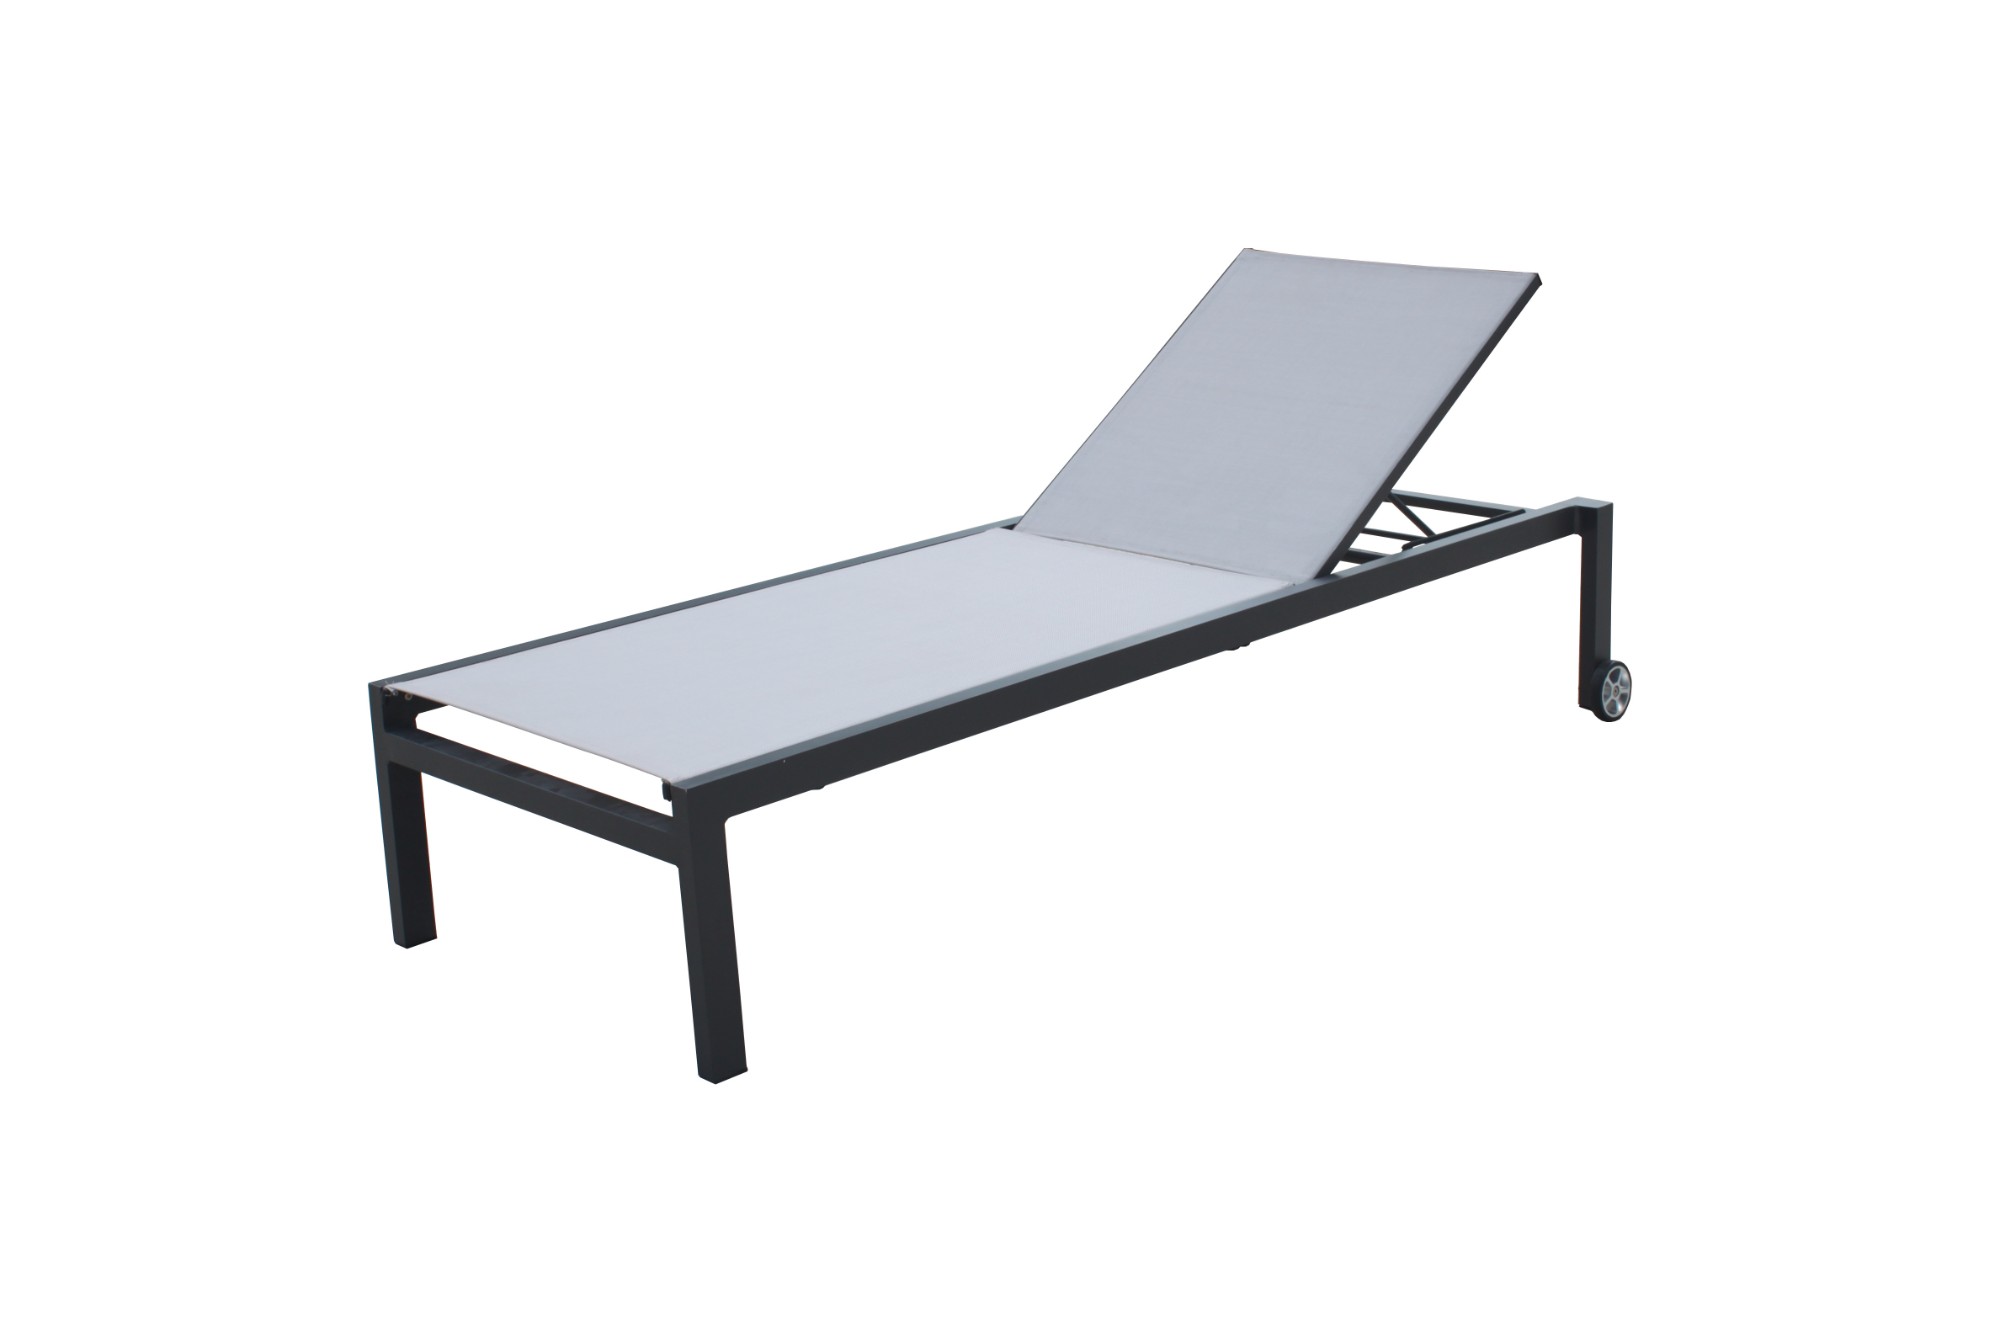 pool lounge chair sun beds outdoor furniture Manufacturers, pool lounge chair sun beds outdoor furniture Factory, Supply pool lounge chair sun beds outdoor furniture